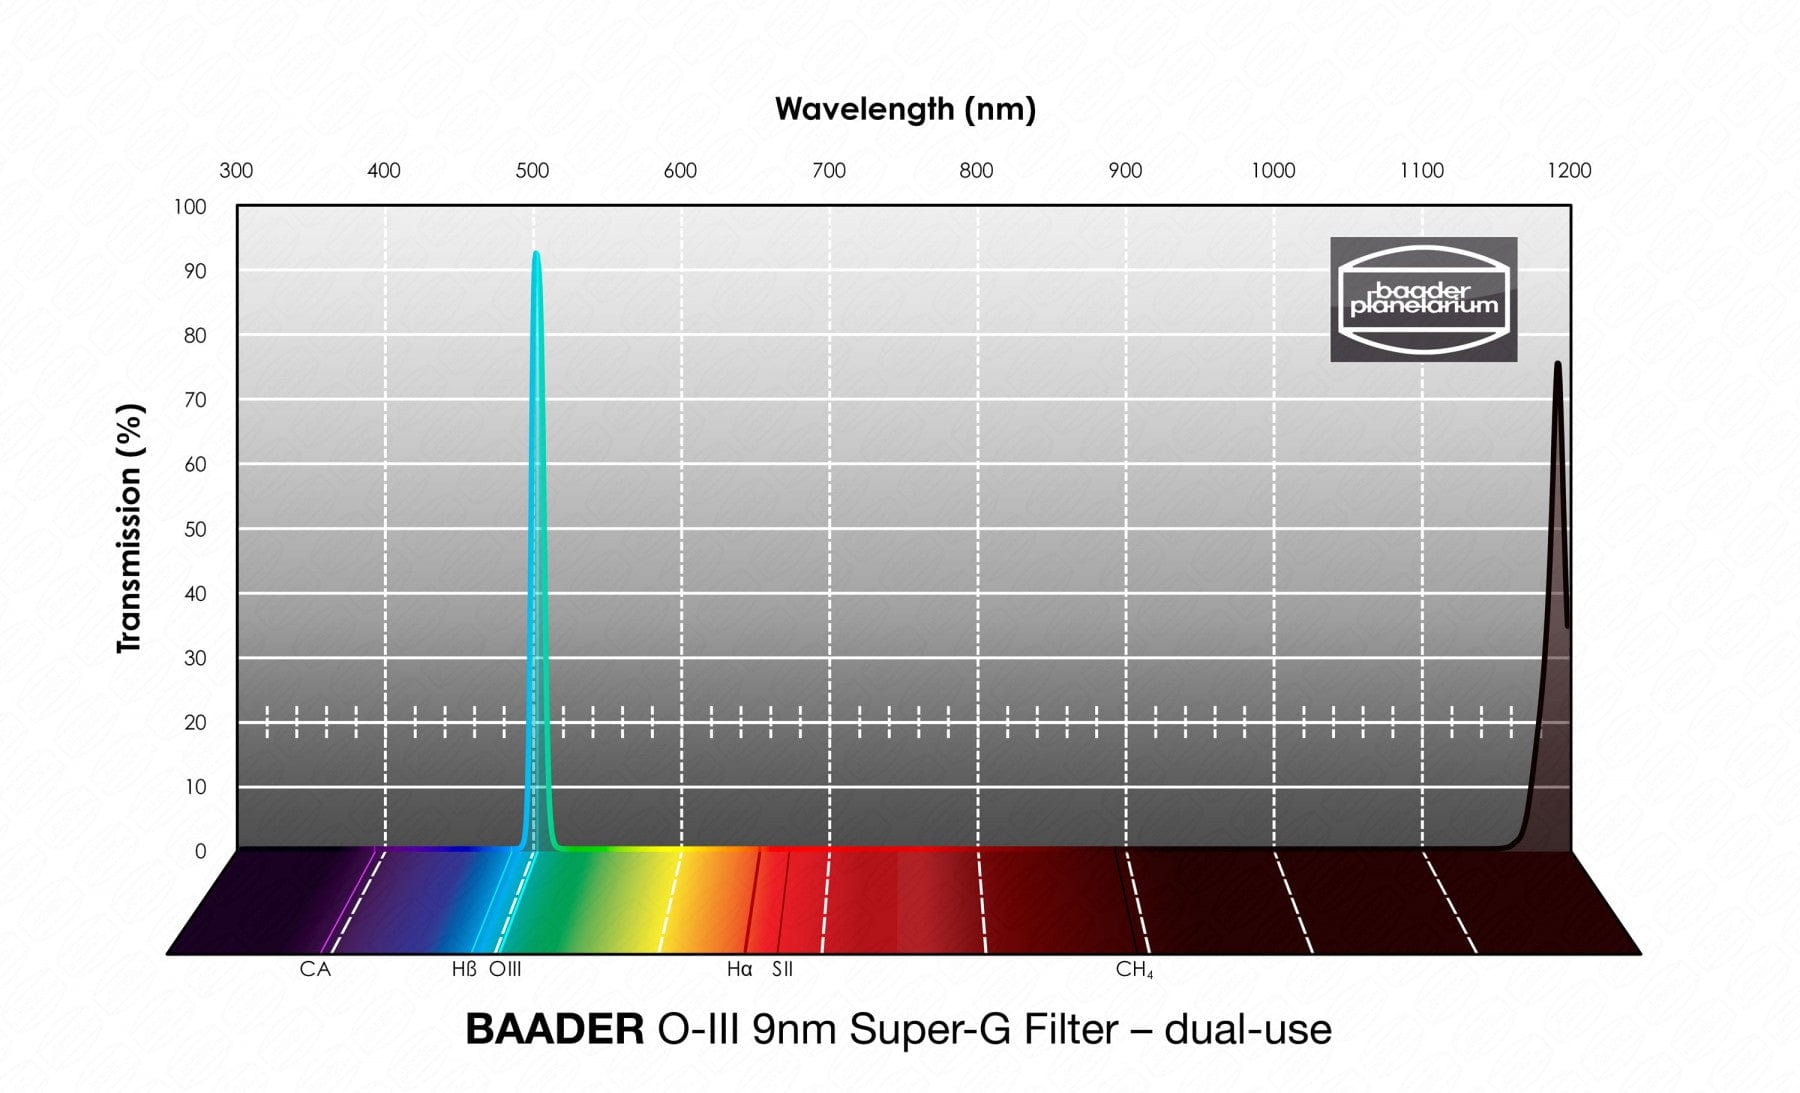 Baader Planetarium Accessory Baader O-III Super-G Filter (9nm) - CMOS optimized 1-1/4" and 2" - 2961550 / 2961551